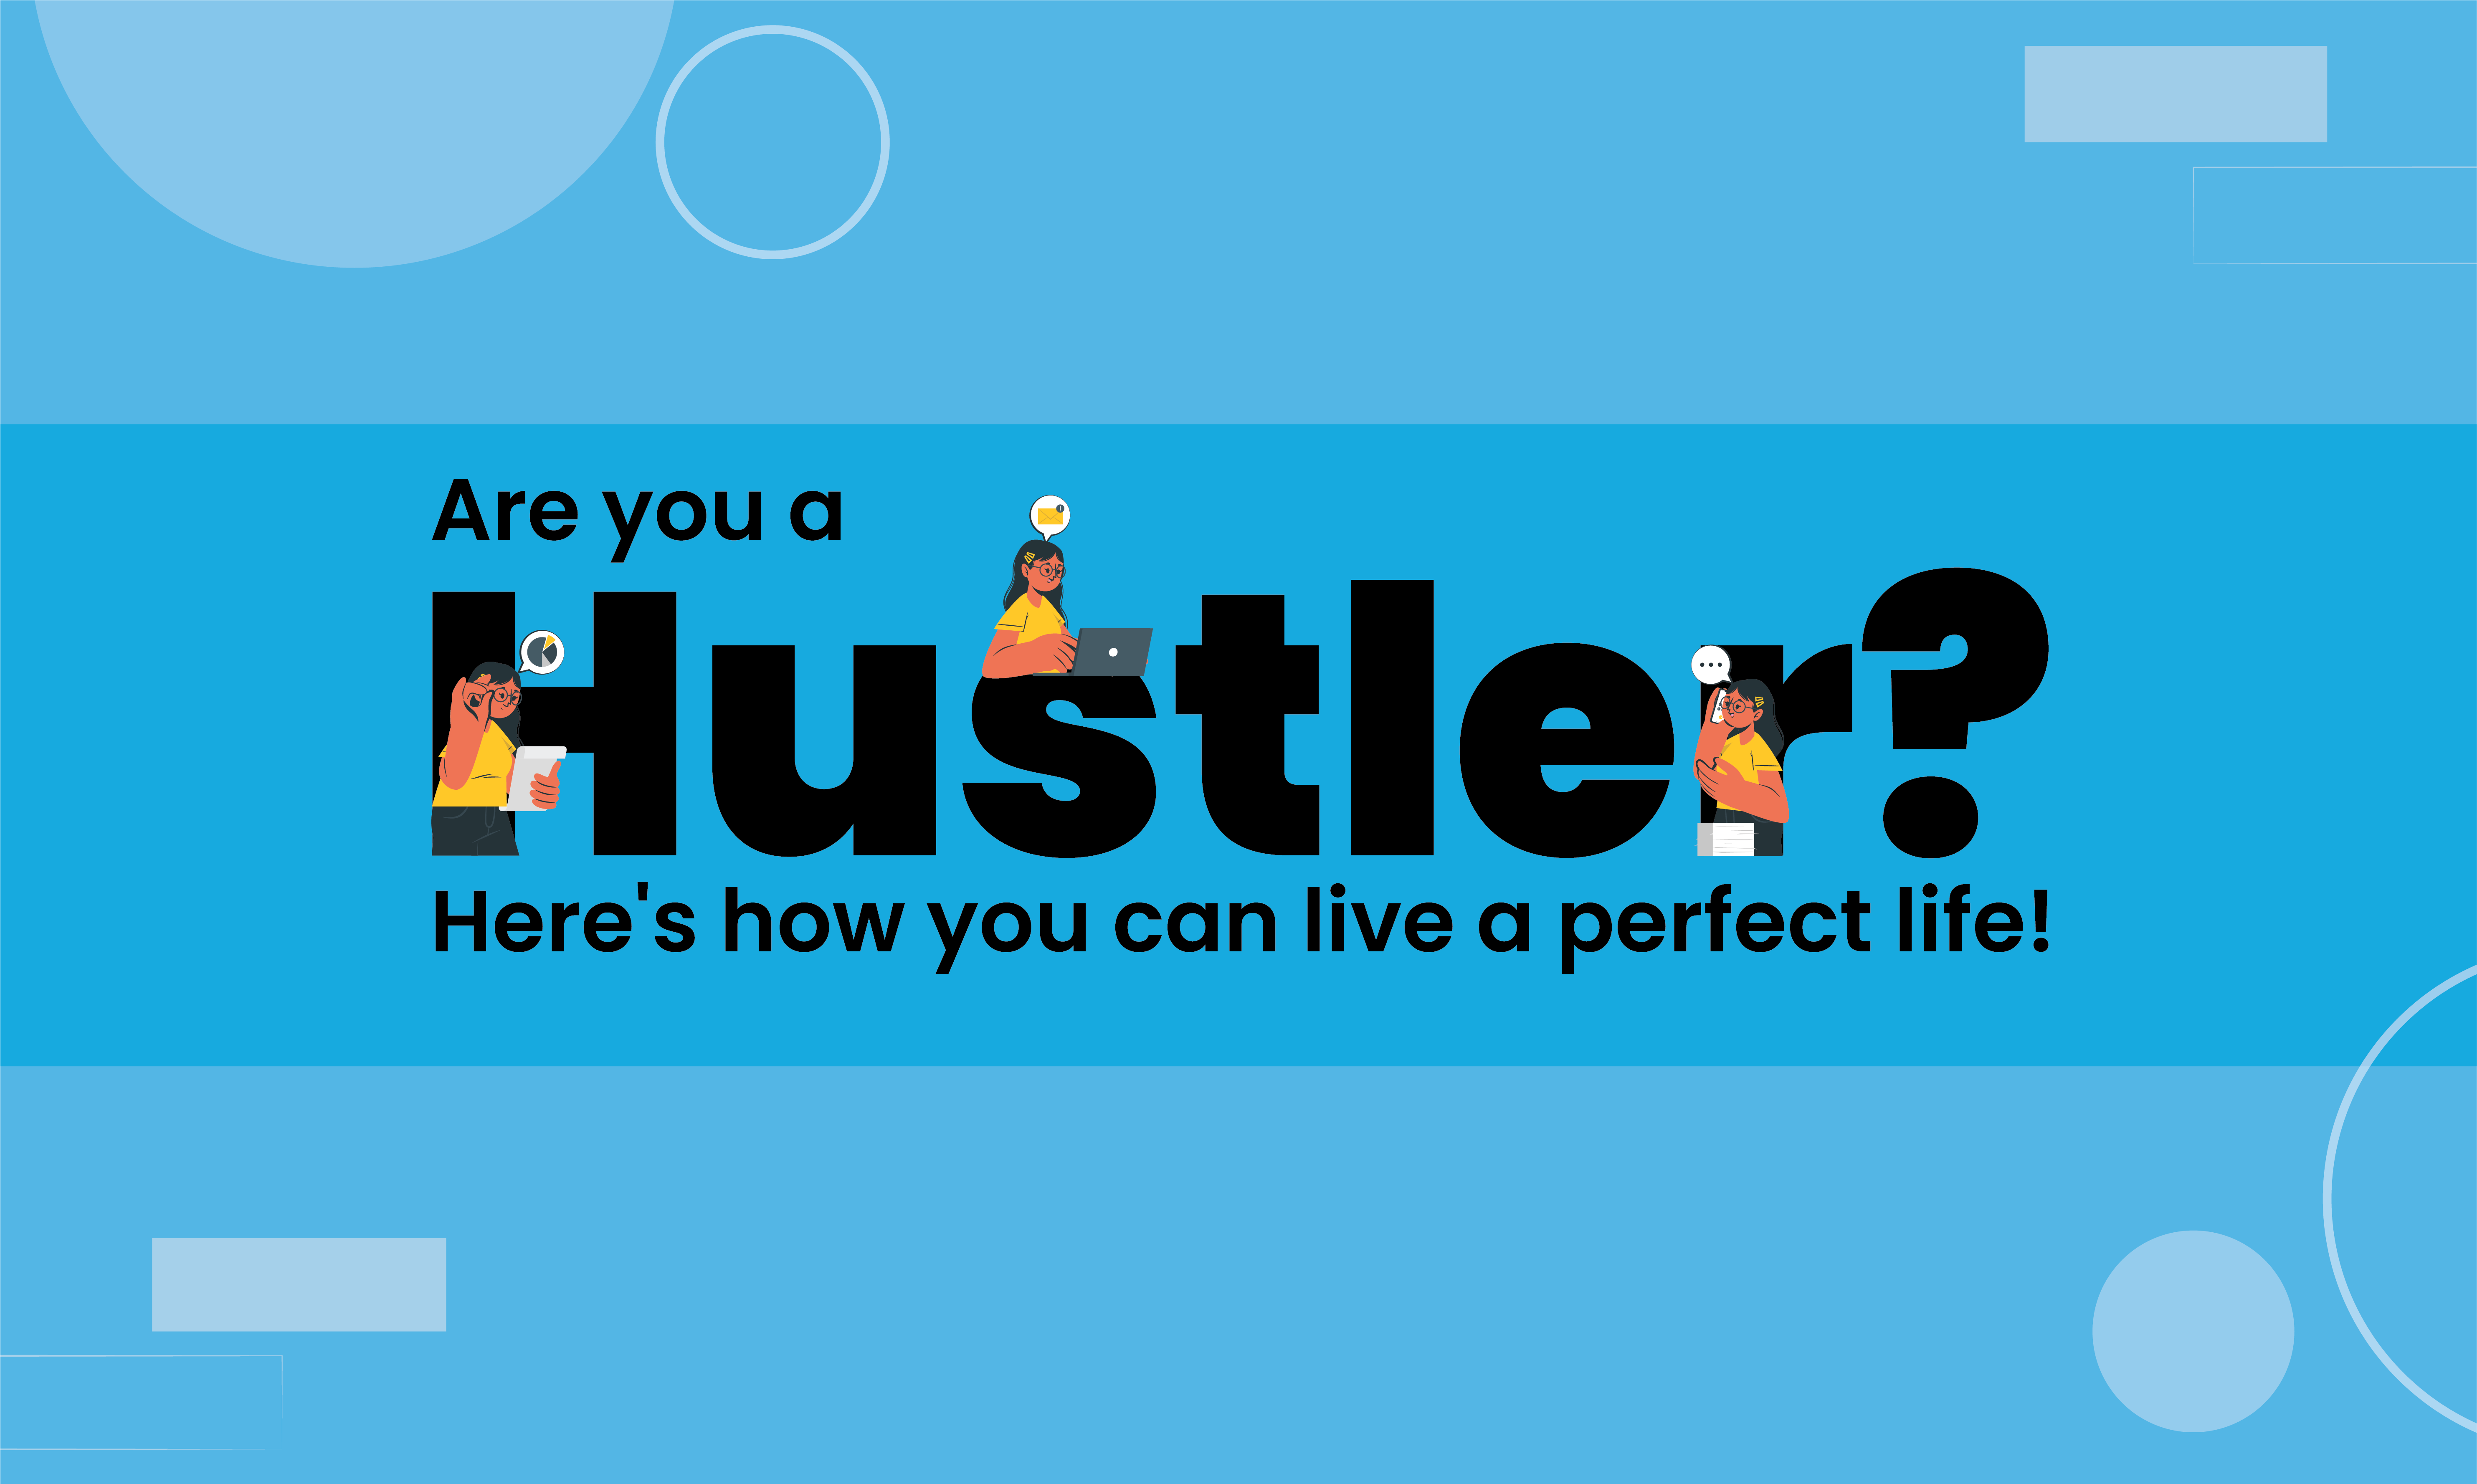 Are you a hustler? Here’s how you can live a perfect life!